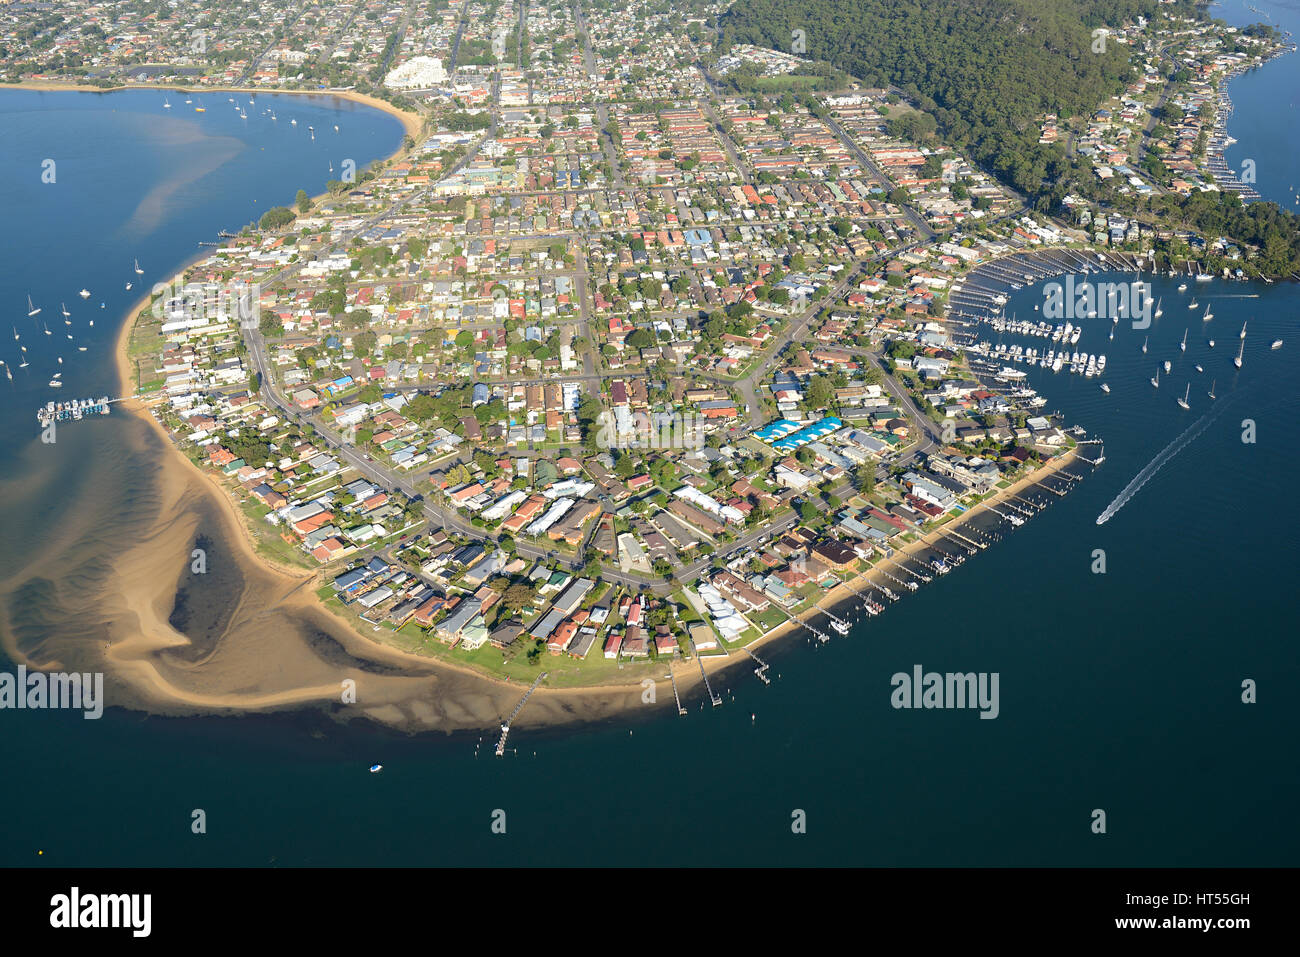 AERIAL VIEW. Resort town of Booker Bay near the mouth of Brisbane Water (an estuary). New South Wales, Australia. Stock Photo